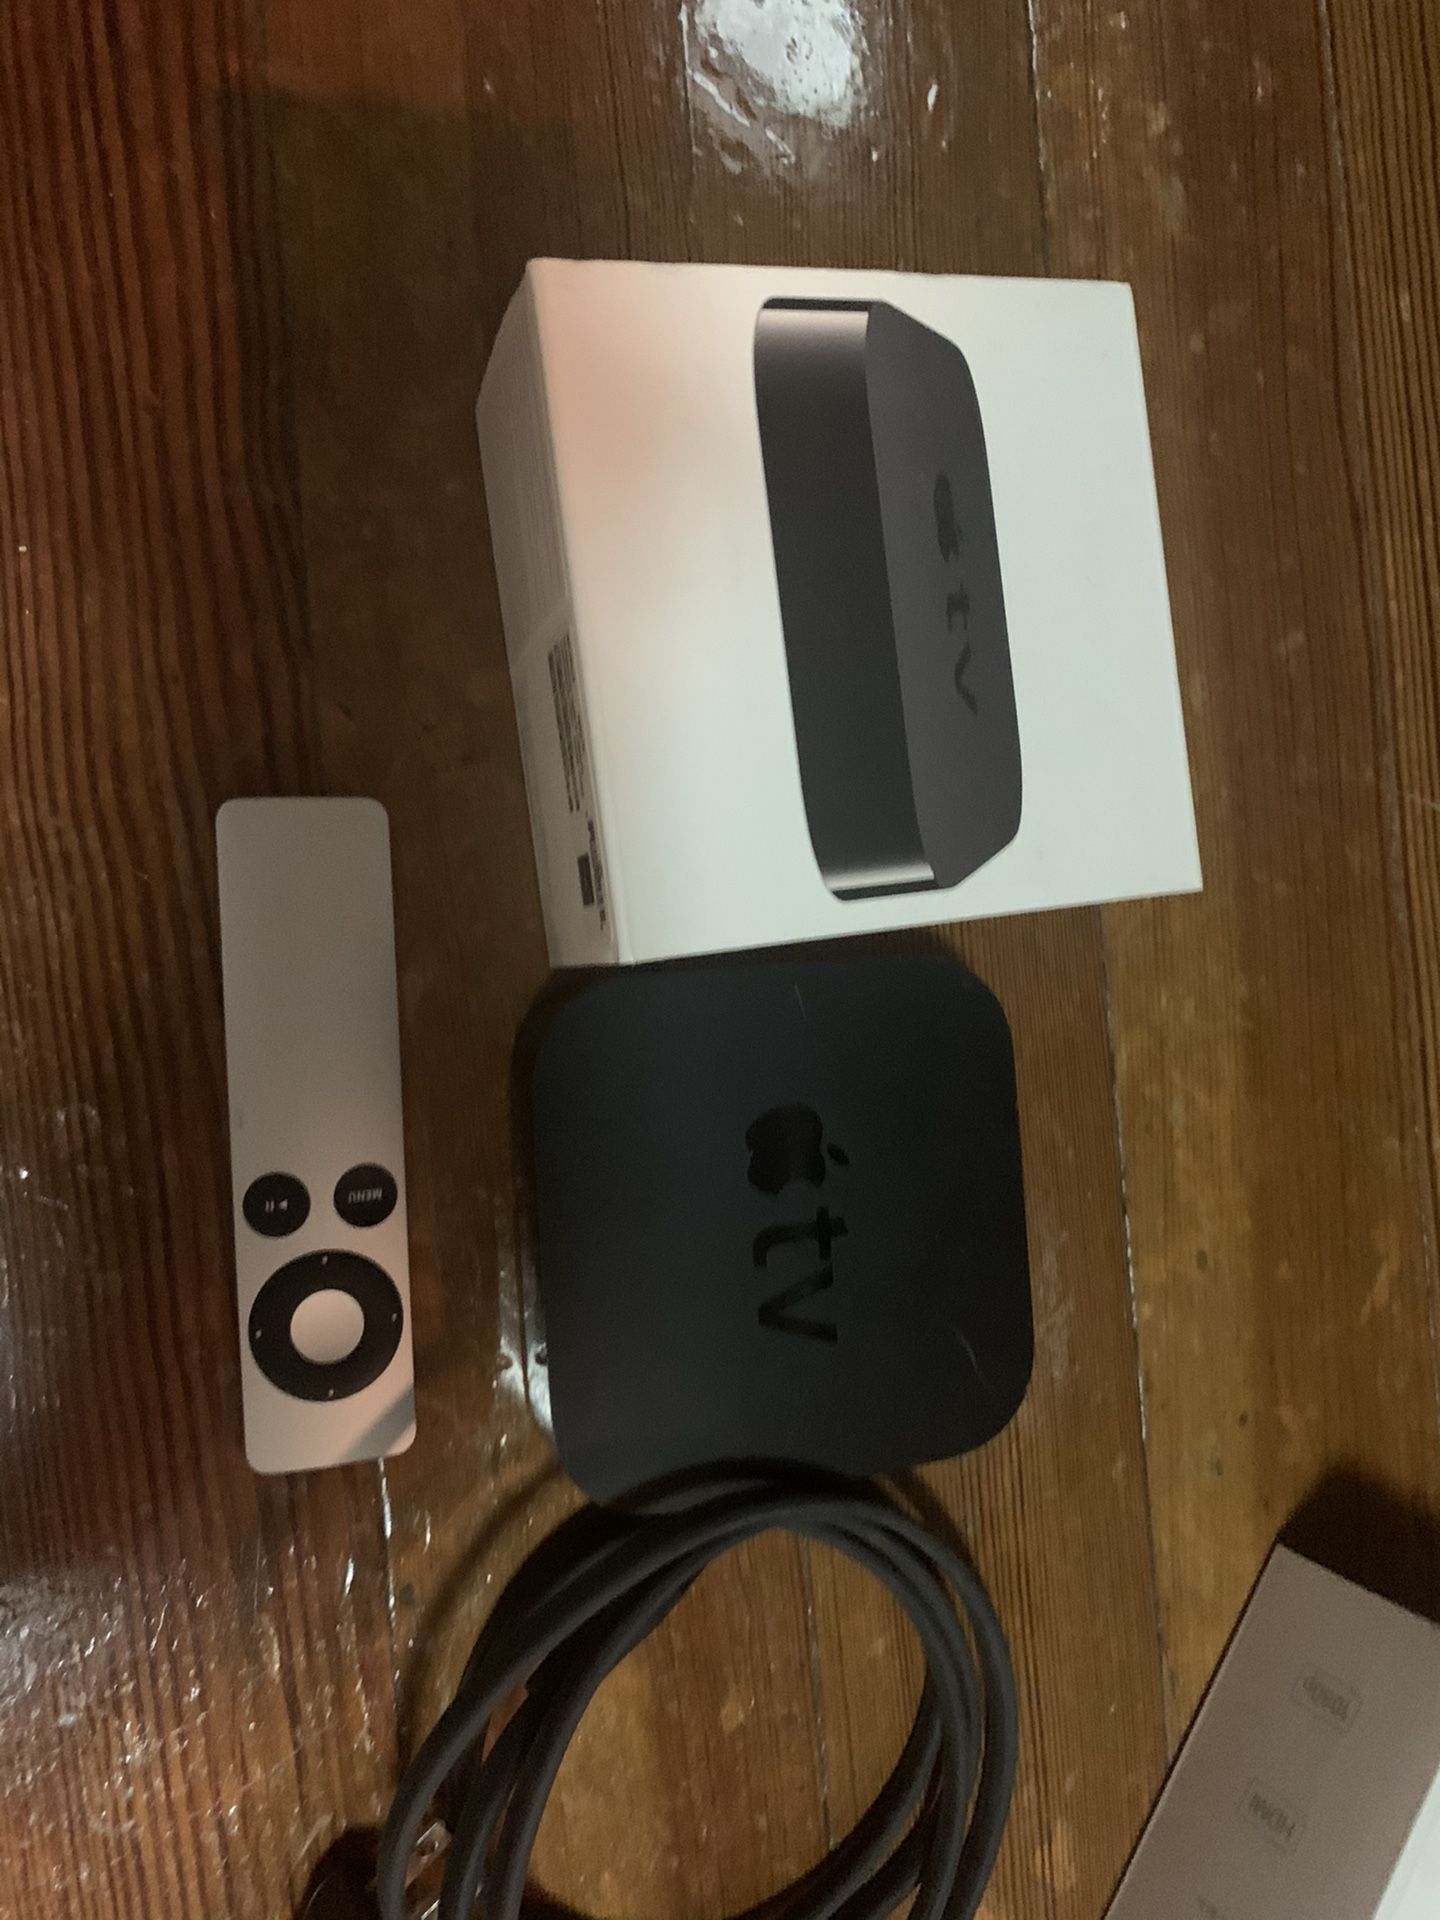 PS3 and Apple TV used